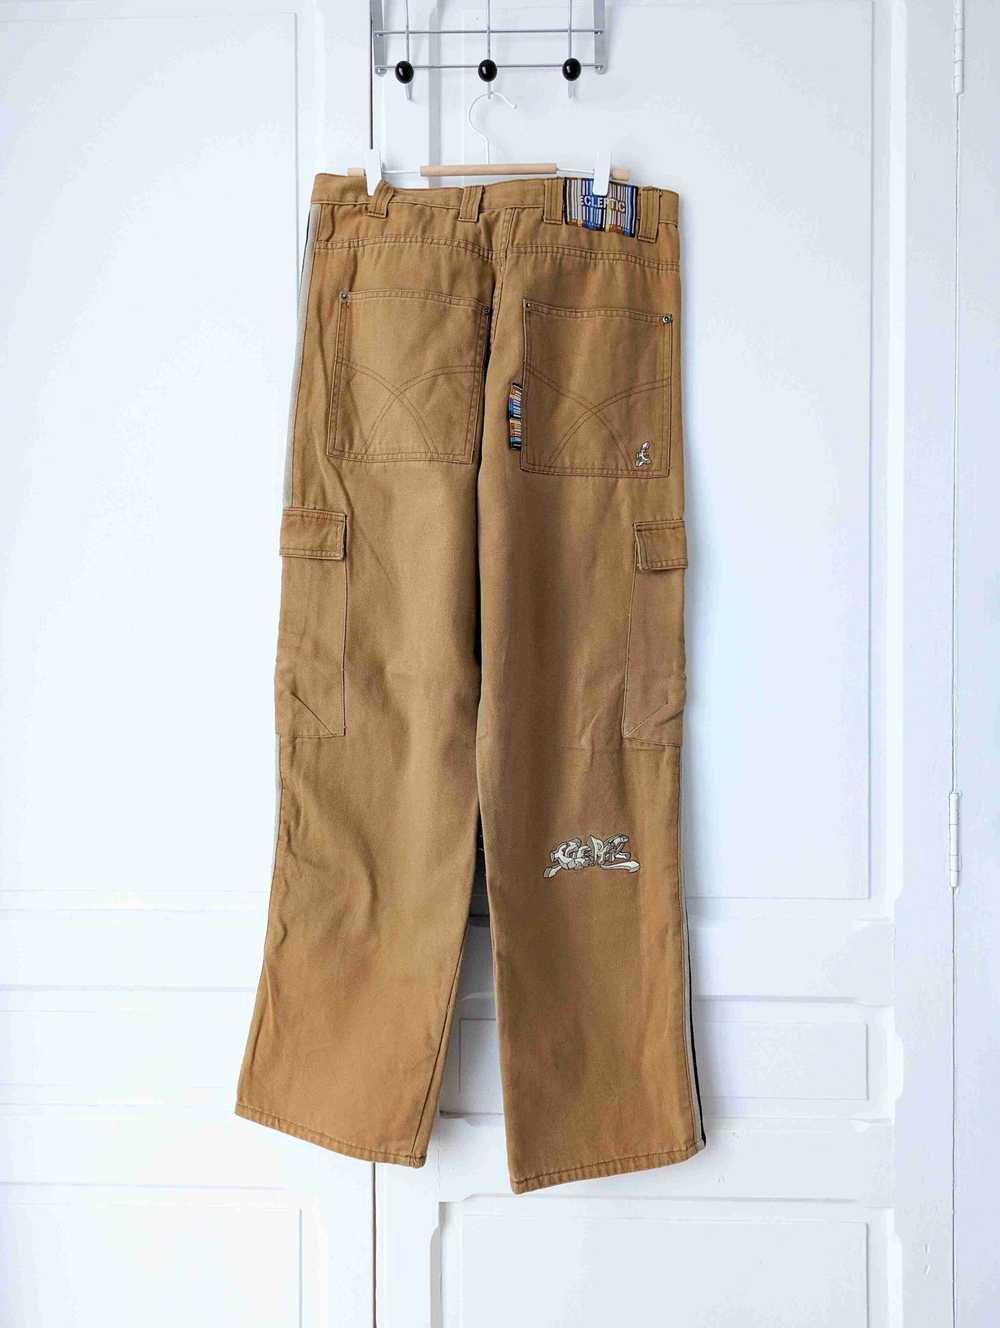 Cotton pants - Cargo/baggy in thick camel cotton … - image 2